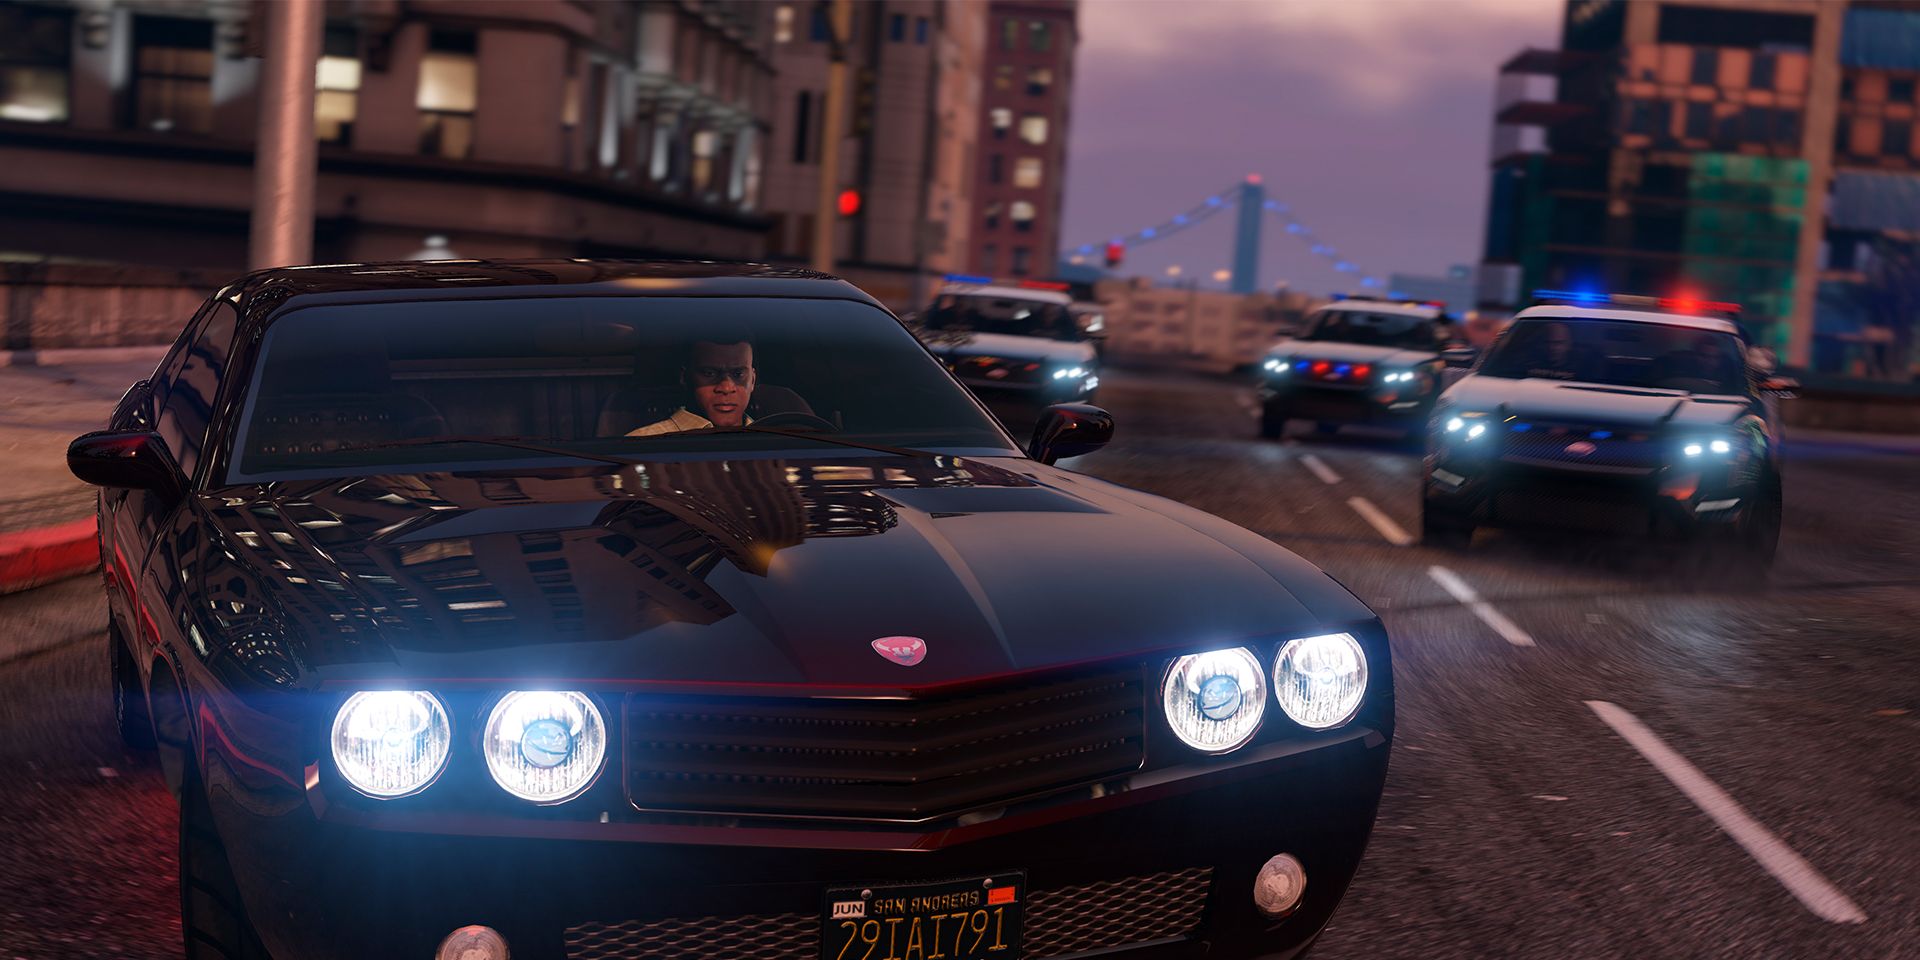 Grand Theft AUto 5 Police chase screenshot